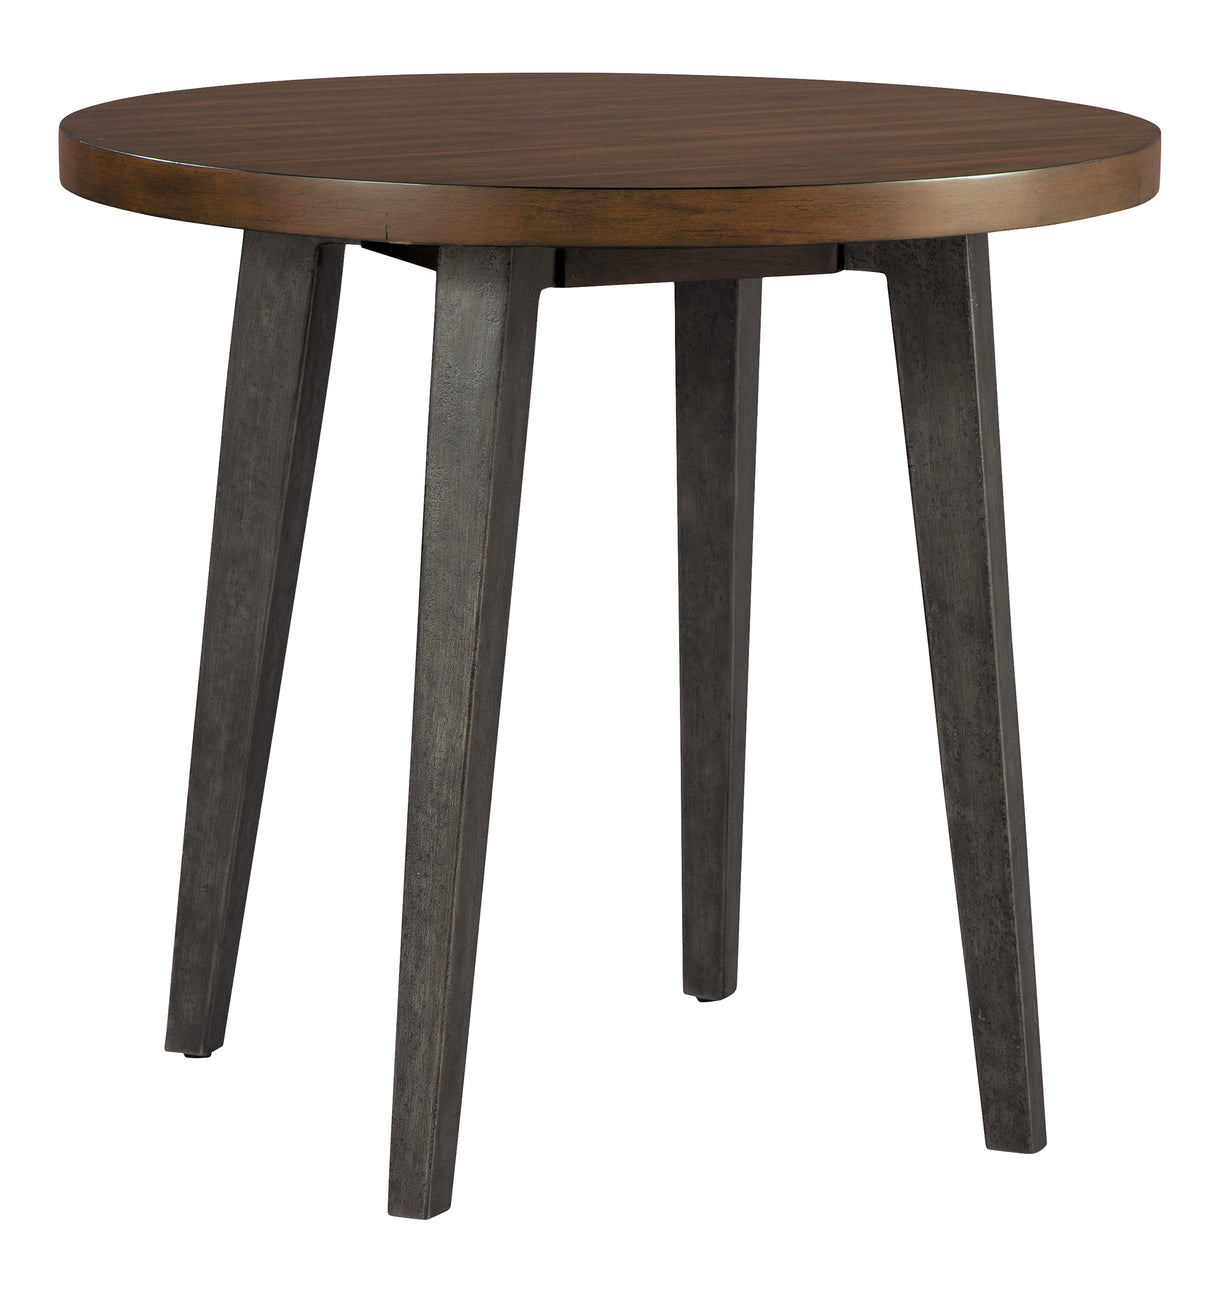 Hekman 24307 Monterey Point 28in. x 28in. x 26in. End Table